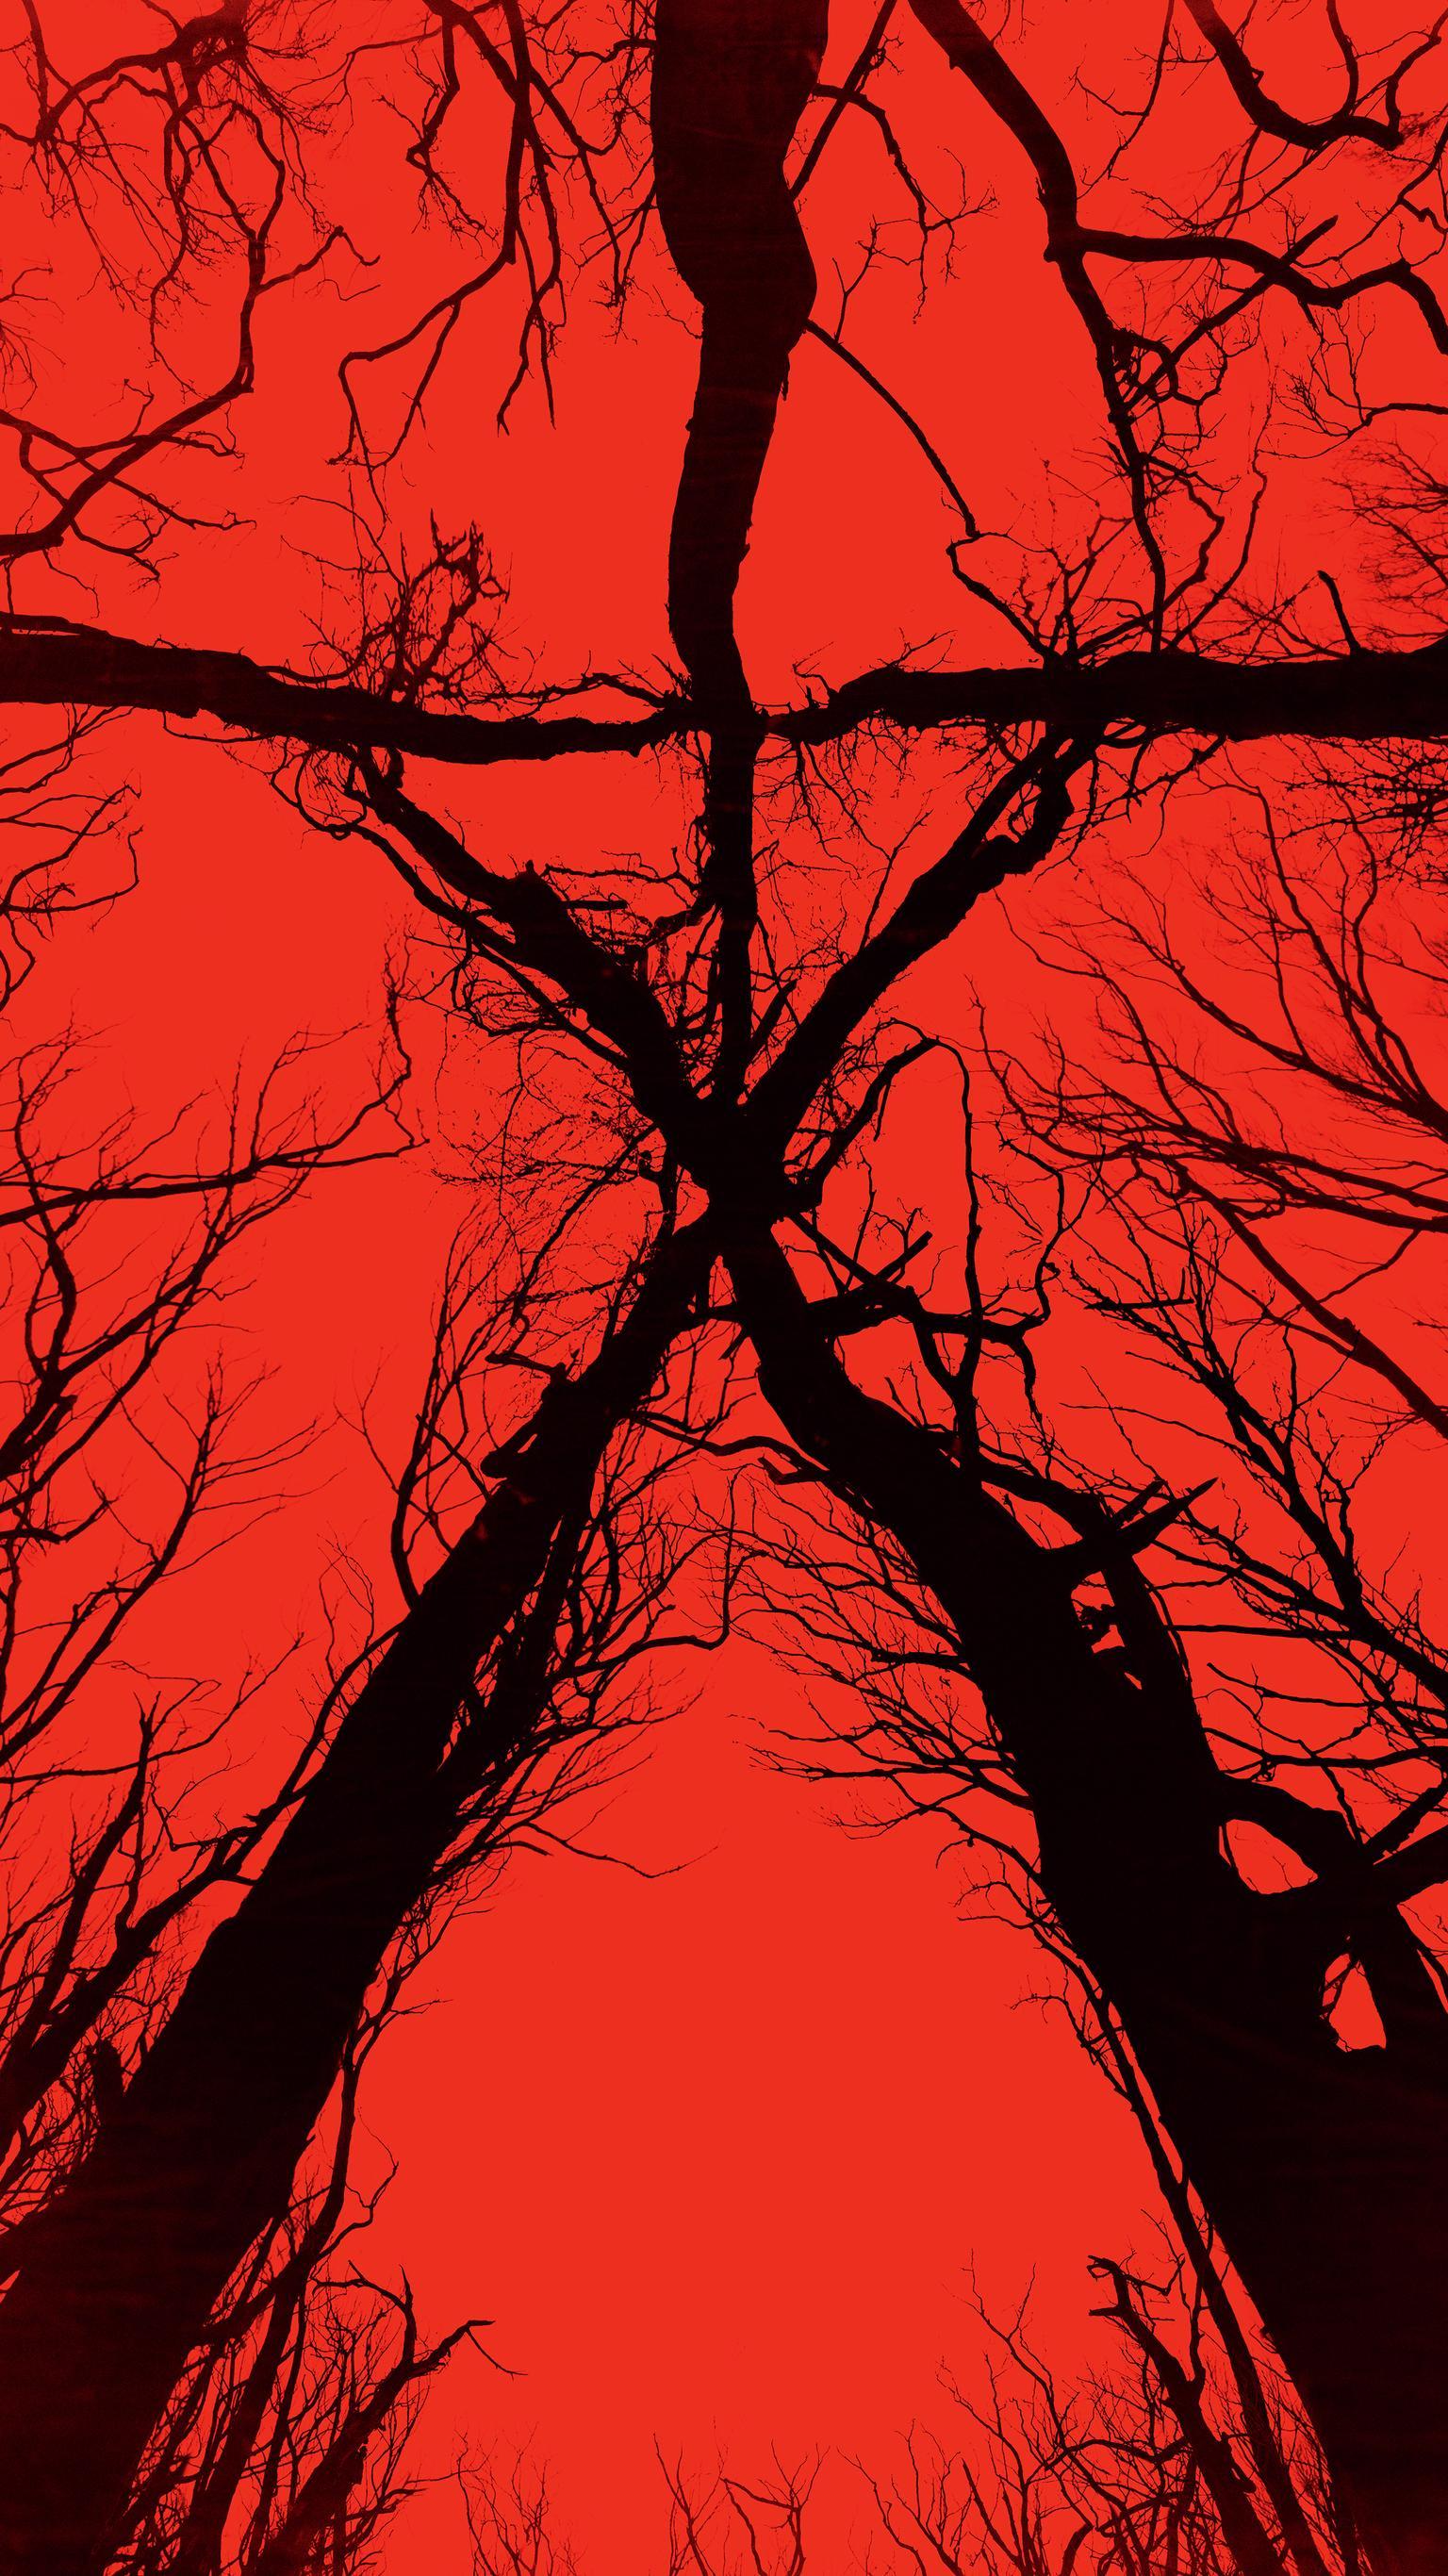 blair witch 3 download